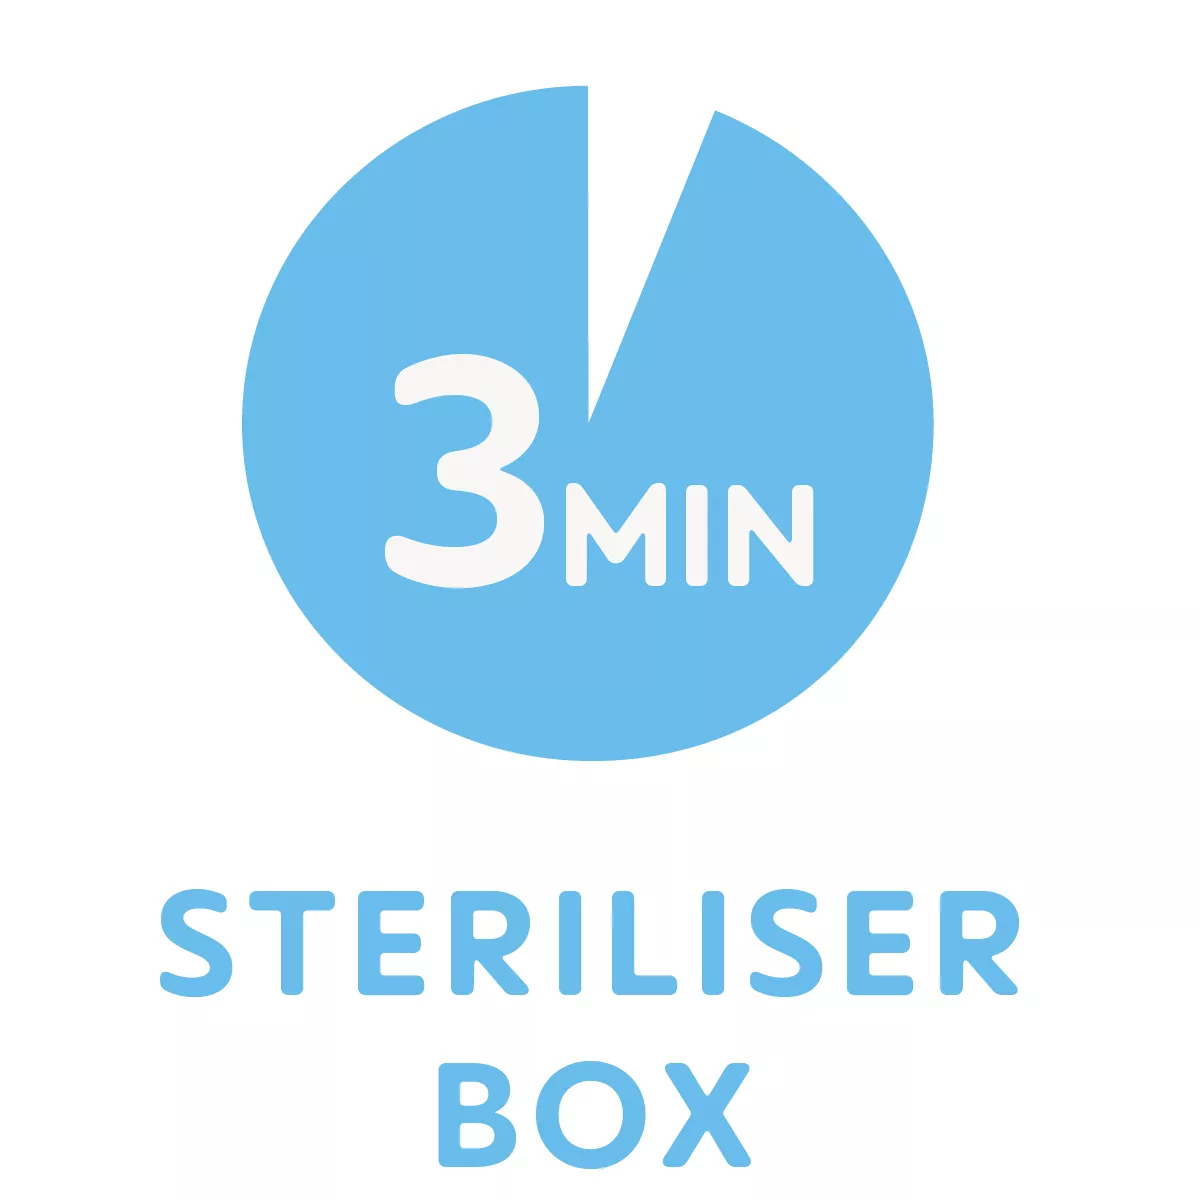 This product comes in a sterilising & carry box – for convenient and time-saving sterilising in the microwave